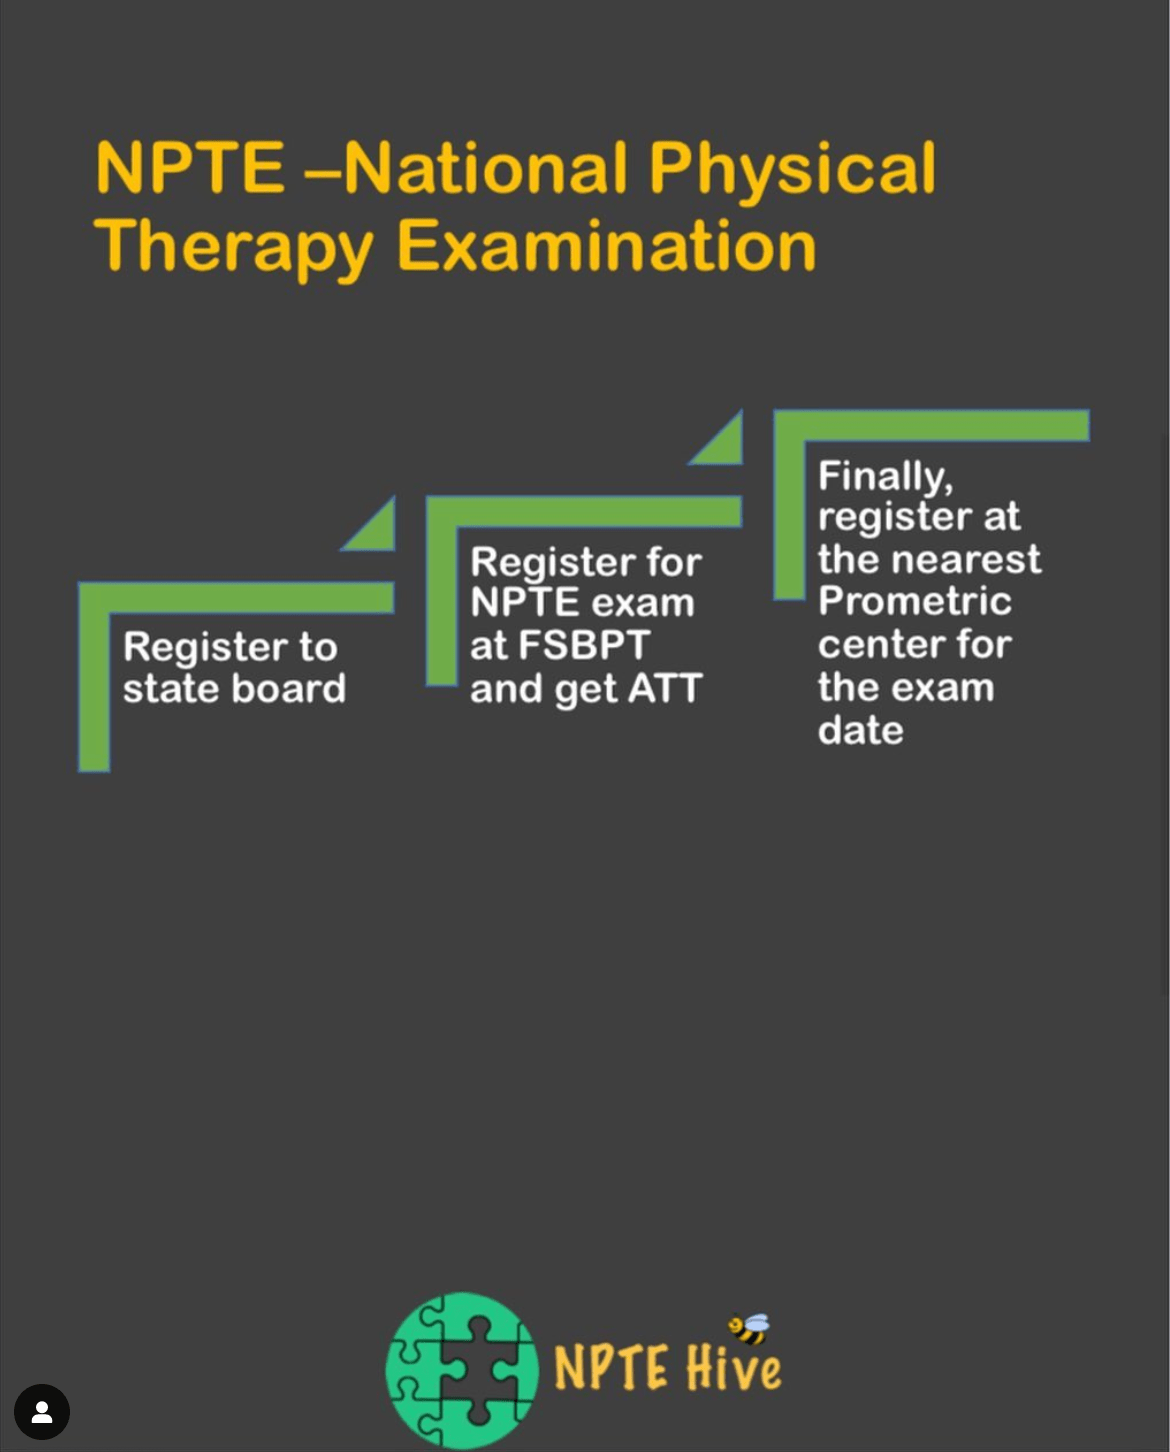 ROAD TO NPTE FOR NON-US PHYSICAL THERAPISTS